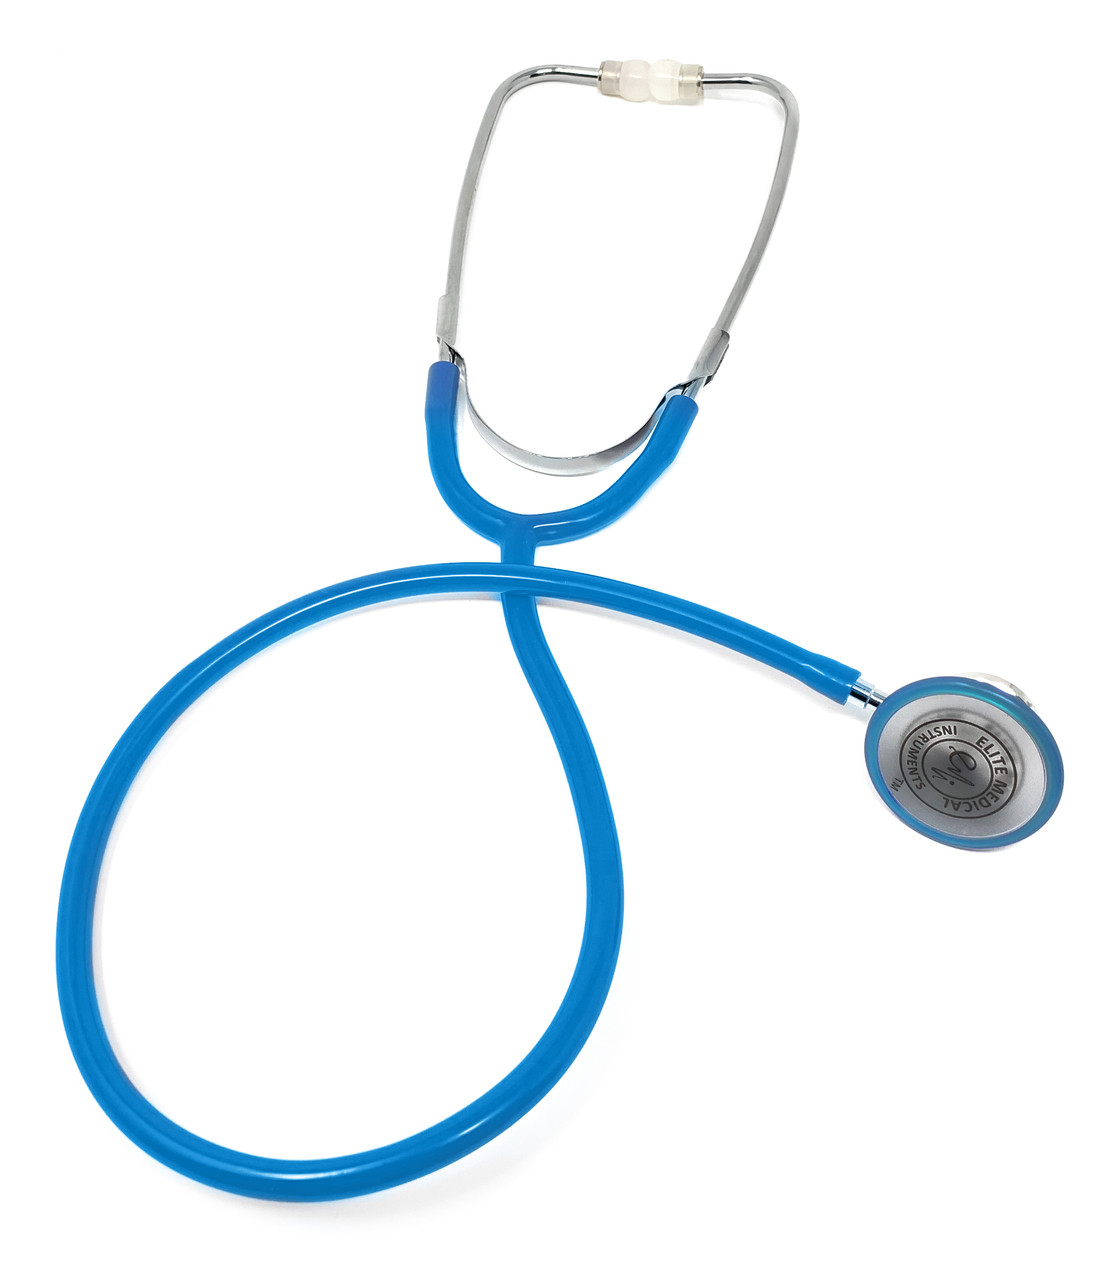 https://cdn11.bigcommerce.com/s-iugkyg/images/stencil/1280x1280/products/110/715/dual_head_stethoscope_colors_baby_blue__94322.1547592113.jpg?c=2?imbypass=on